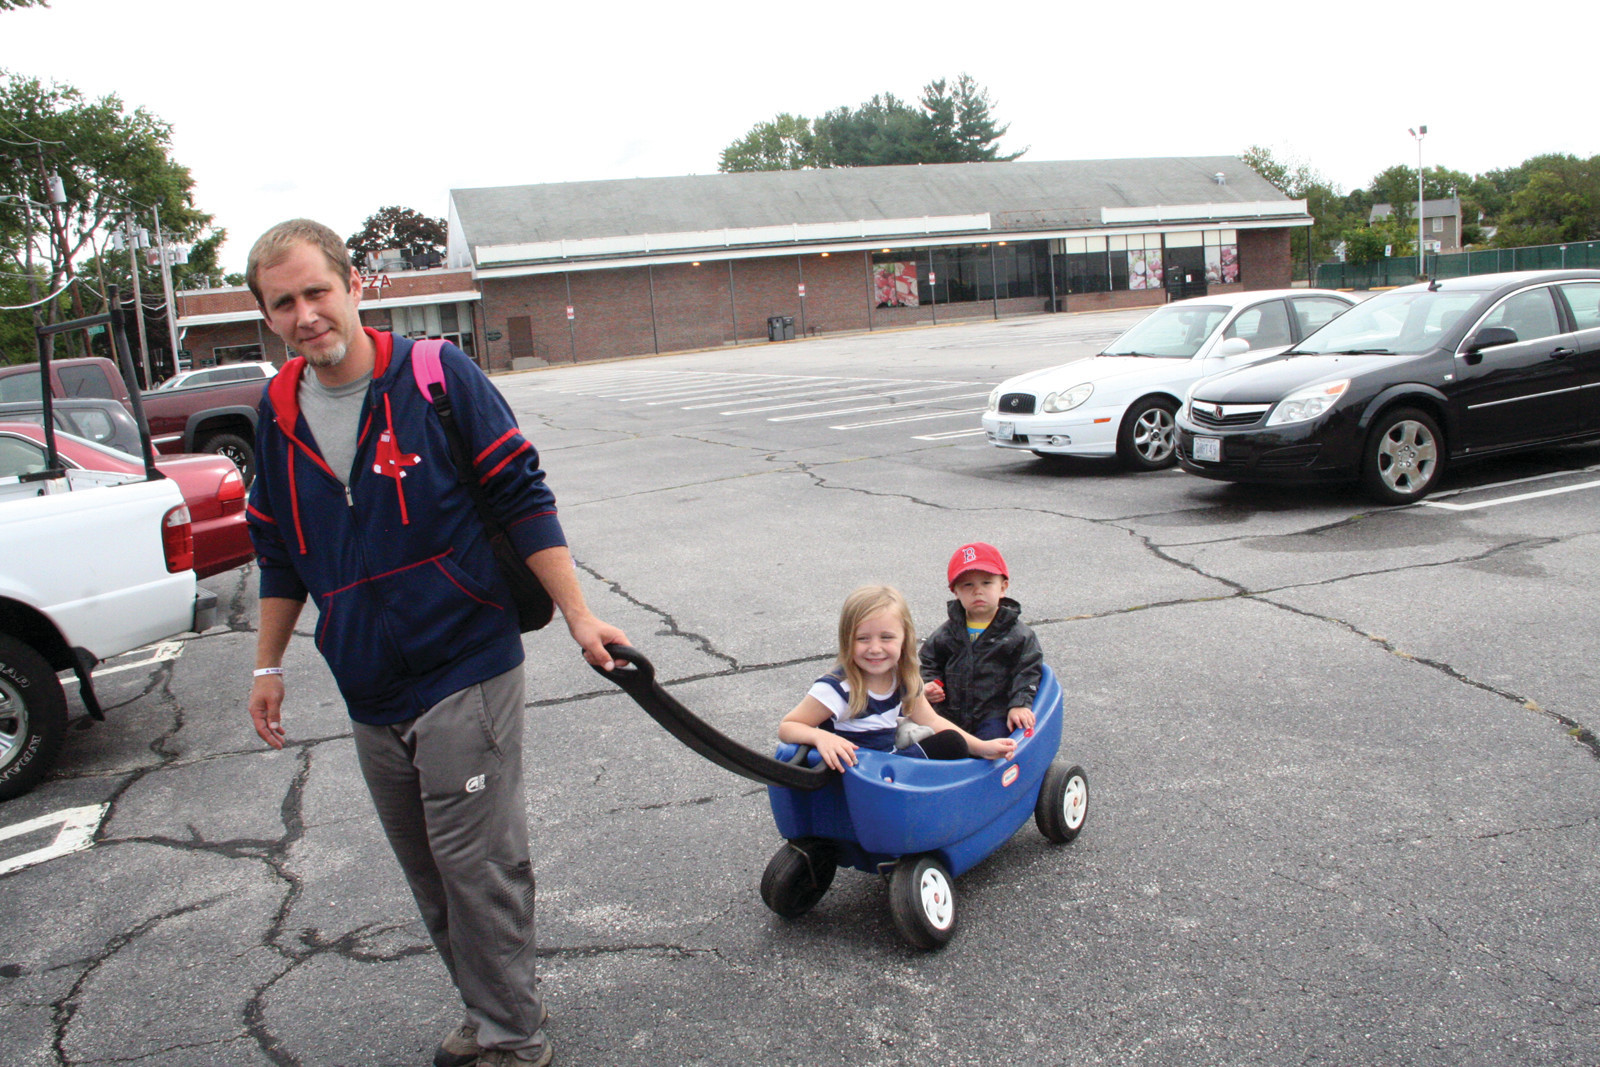 â€˜NICE TO HAVE AN OPTIONâ€™: Greg Phillips, who lives in the neighborhood of the planned Daveâ€™s Marketplace, knows the property well, as he worked there when it was a Hi-Lo market. He has in tow his daughter, Bella, a pre-schooler at Little Shepard across Pontiac Avenue from the proposed store, and his son, J.J., who is two years old.